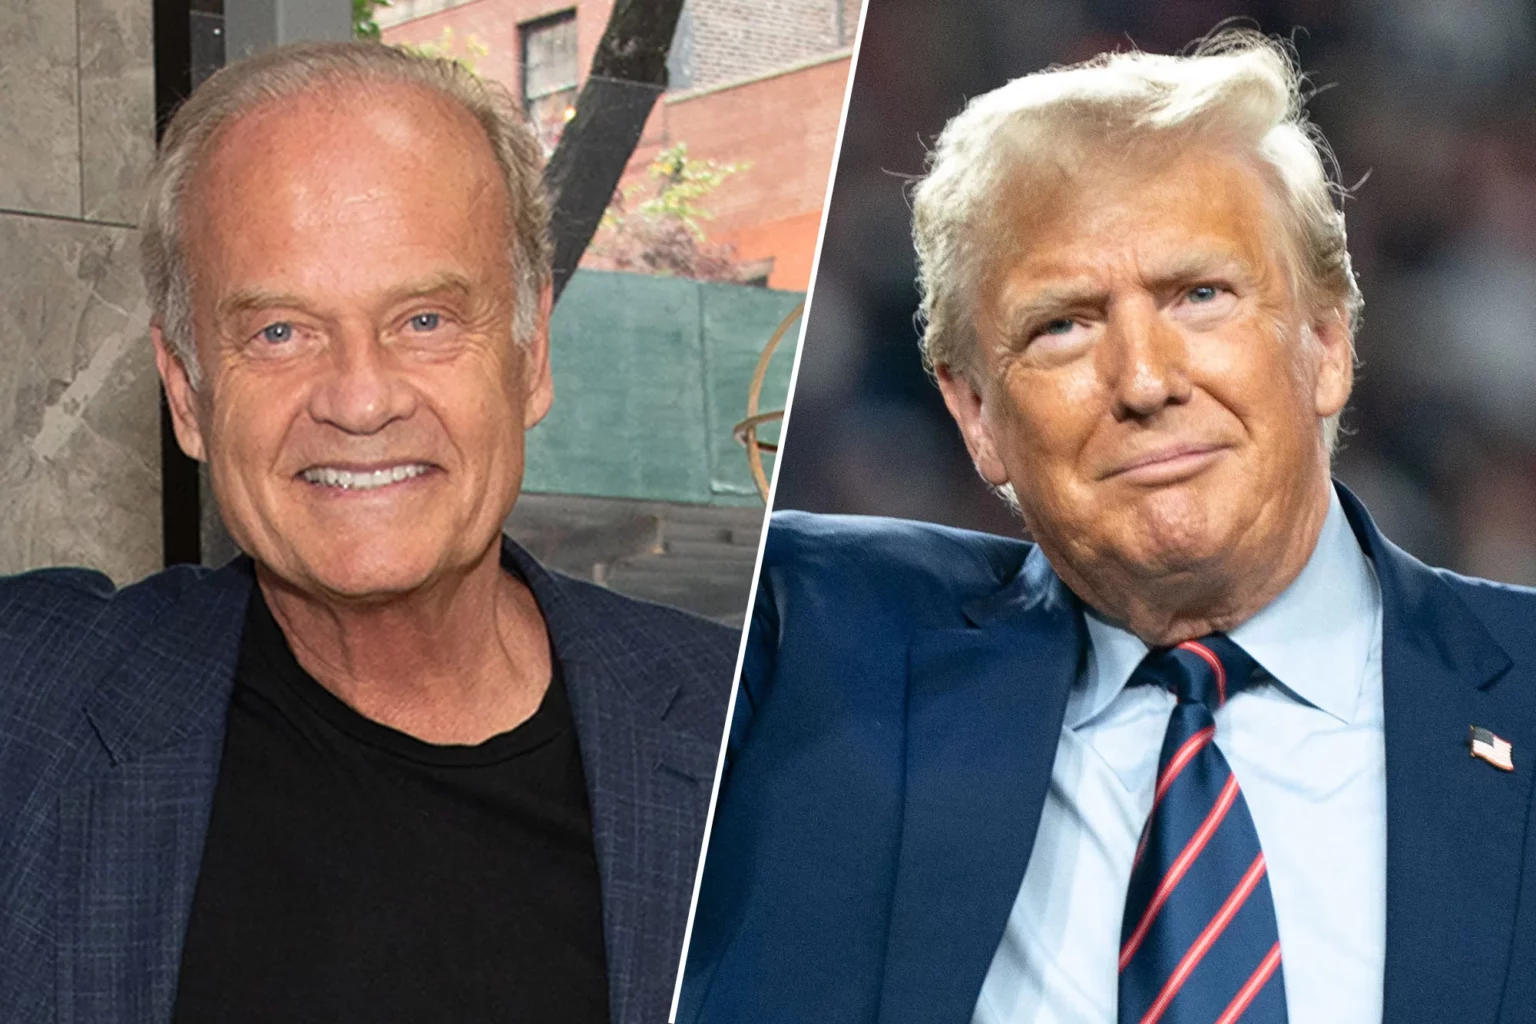 paramount-blocked-kelsey-grammer-from-talking-about-trump-support-bbc-claims